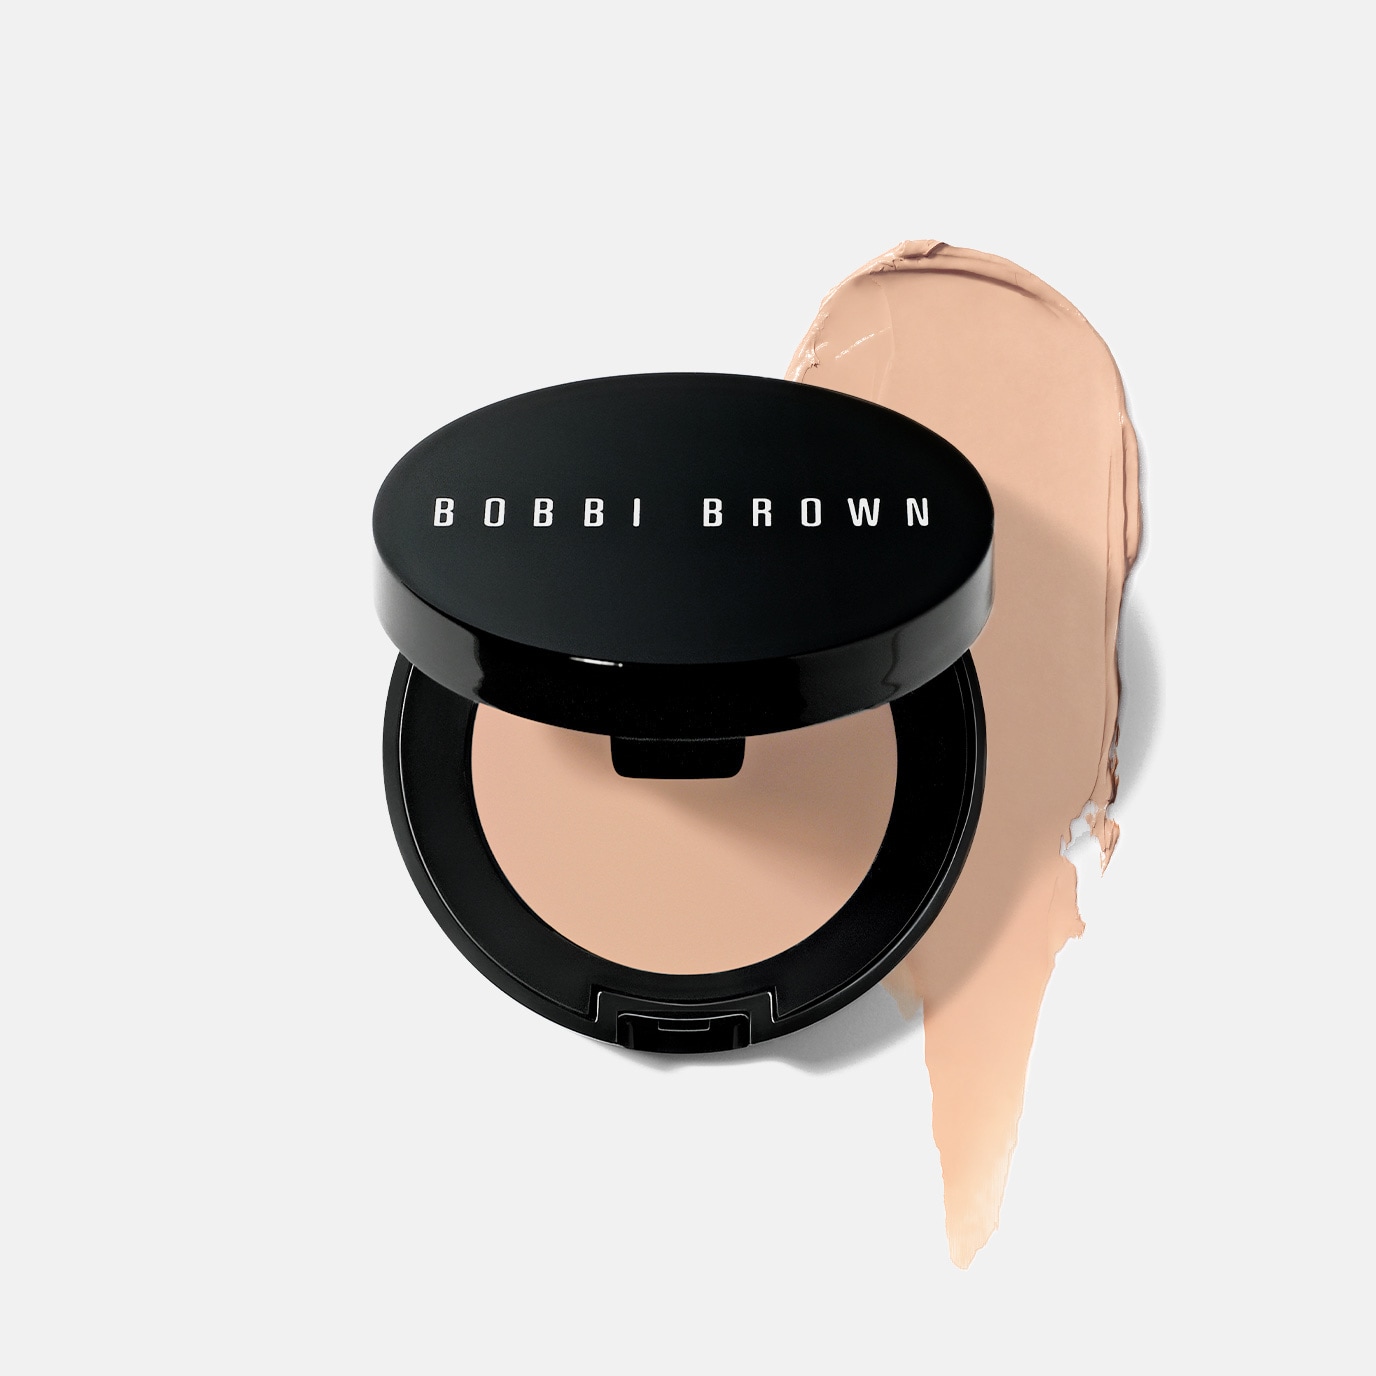 How To Correct Discoloration Bobbi Brown